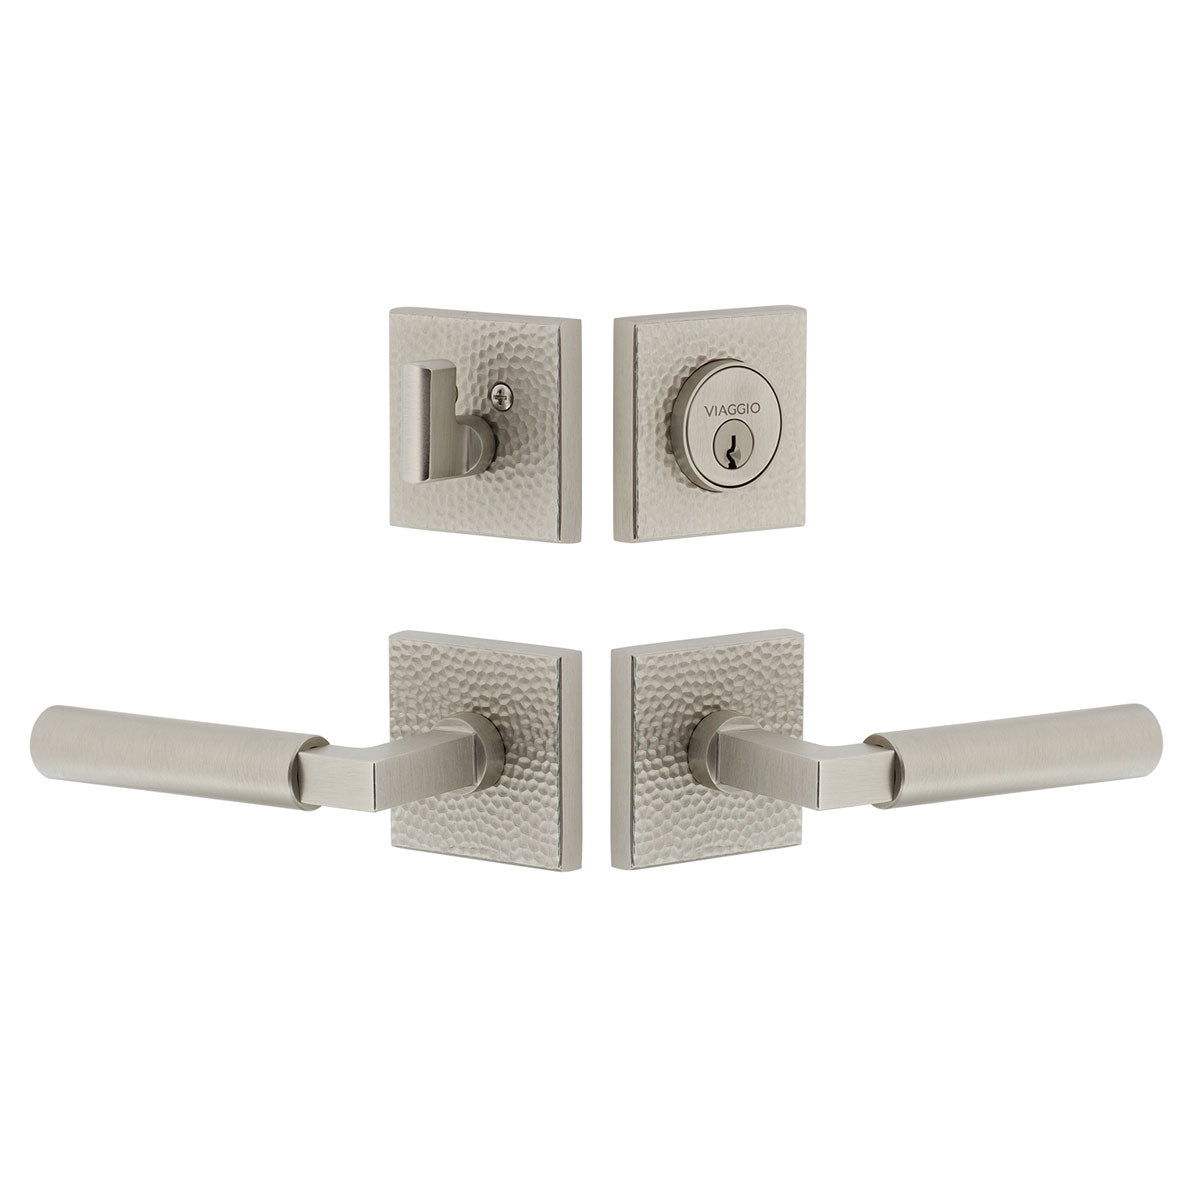 Quadrato Hammered Rosette Entry Set with Contempo Lever in Satin Nickel